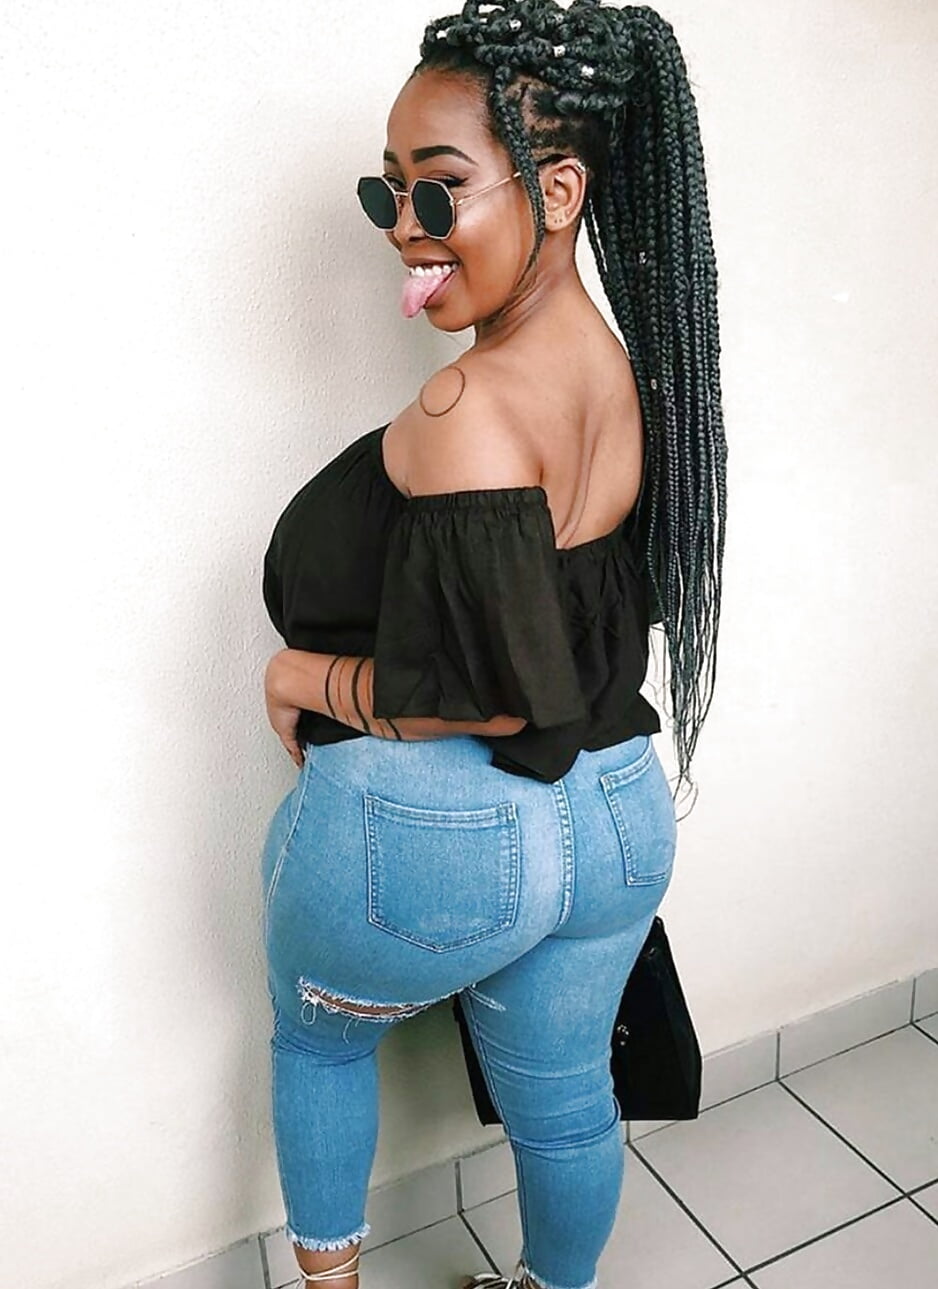 Black Asses in Jeans 6 (48/94)